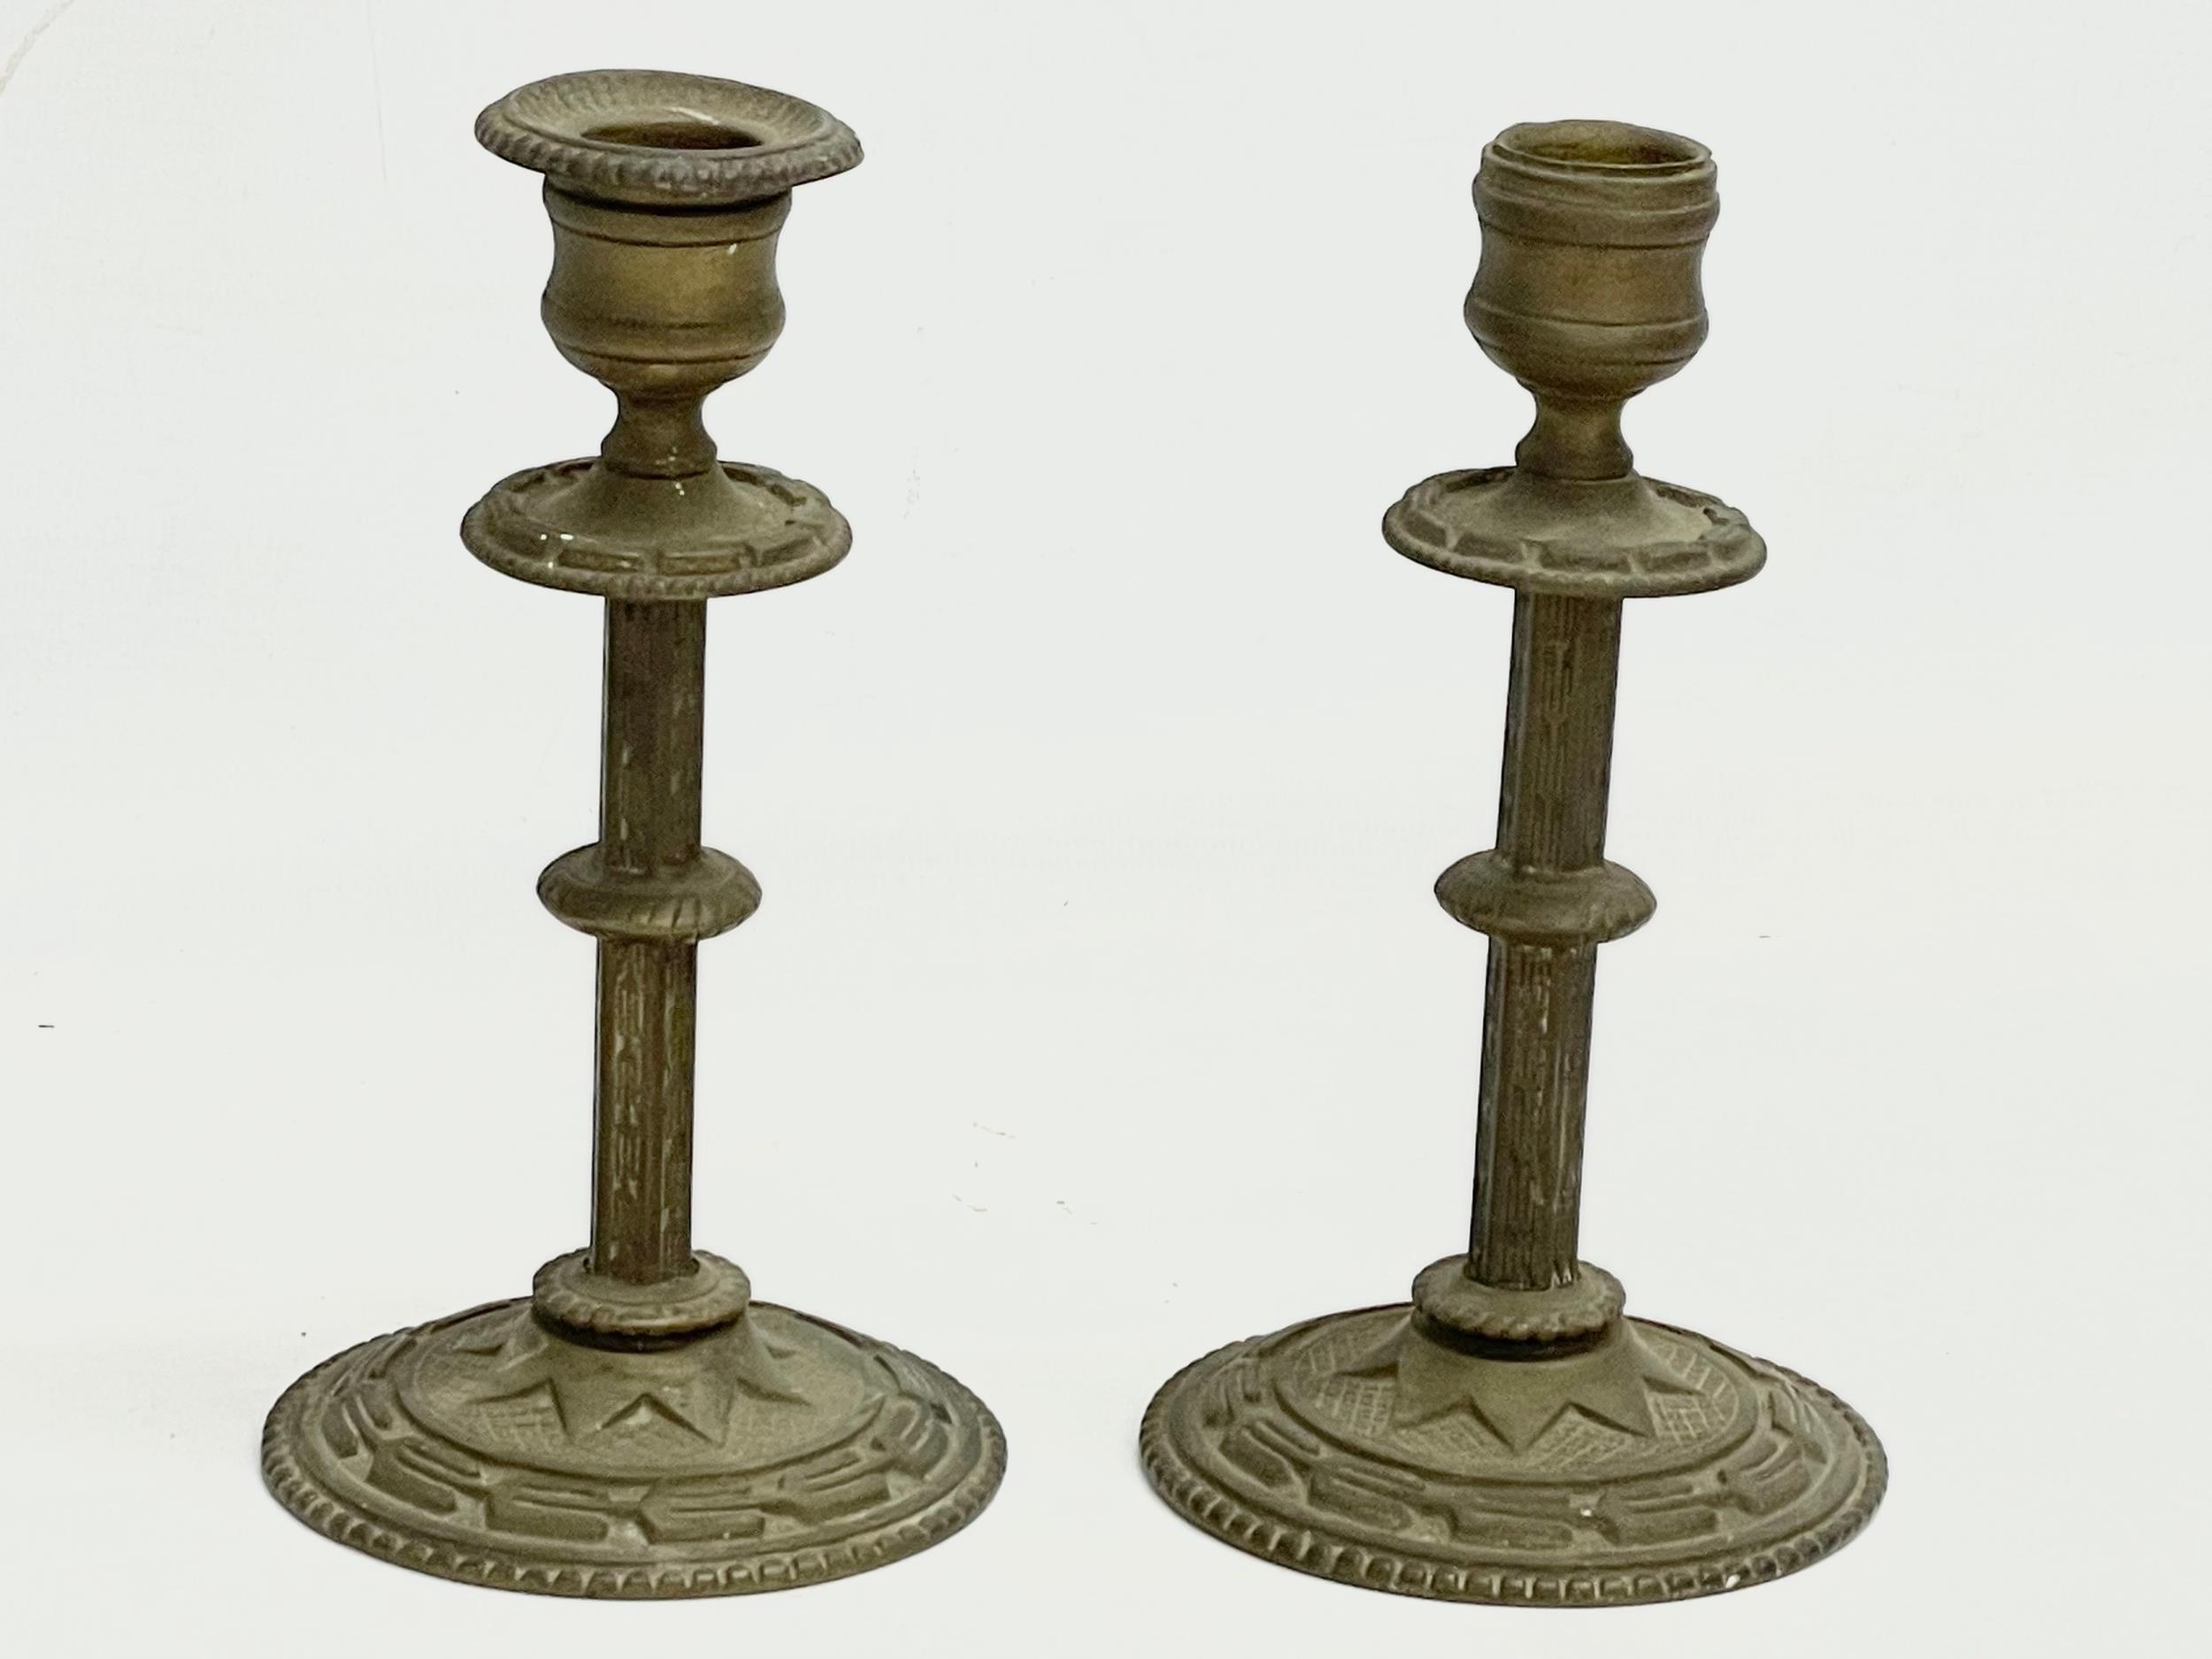 A 19th century spelter bust on stand with a pair of late 19th century brass candlesticks. Bust - Image 2 of 6